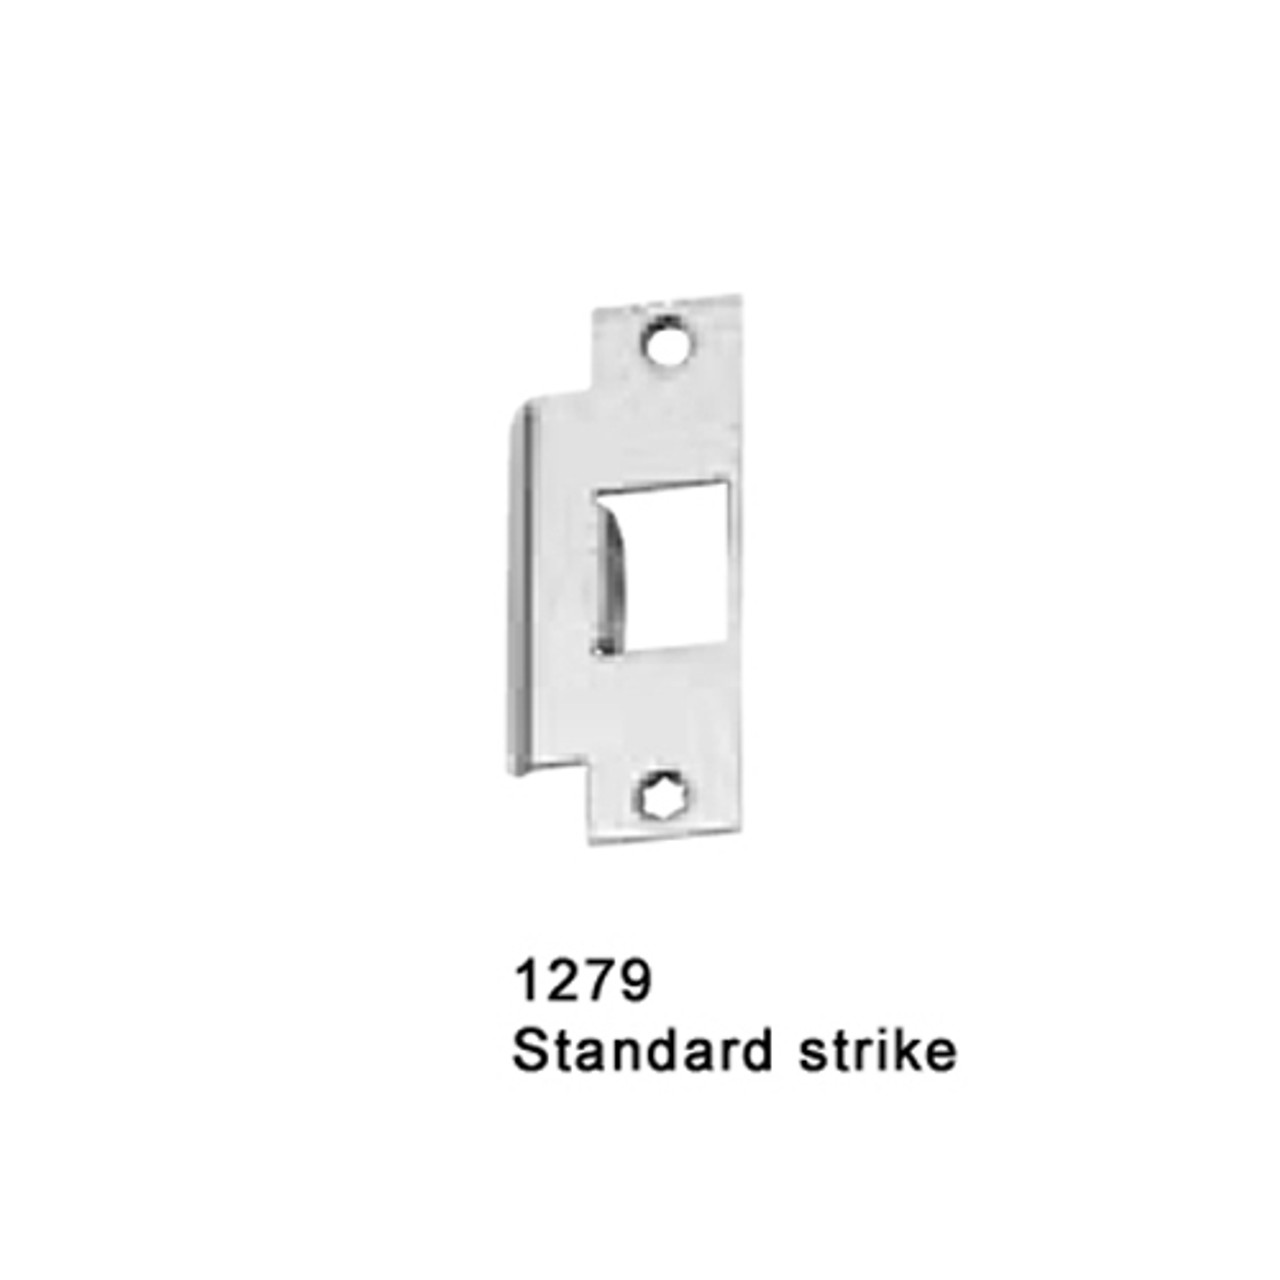 CD25-M-TP-US26D-3-LHR Falcon 25 Series Mortise Lock Devices with 512TP Thumbpiece Trim in Satin Chrome